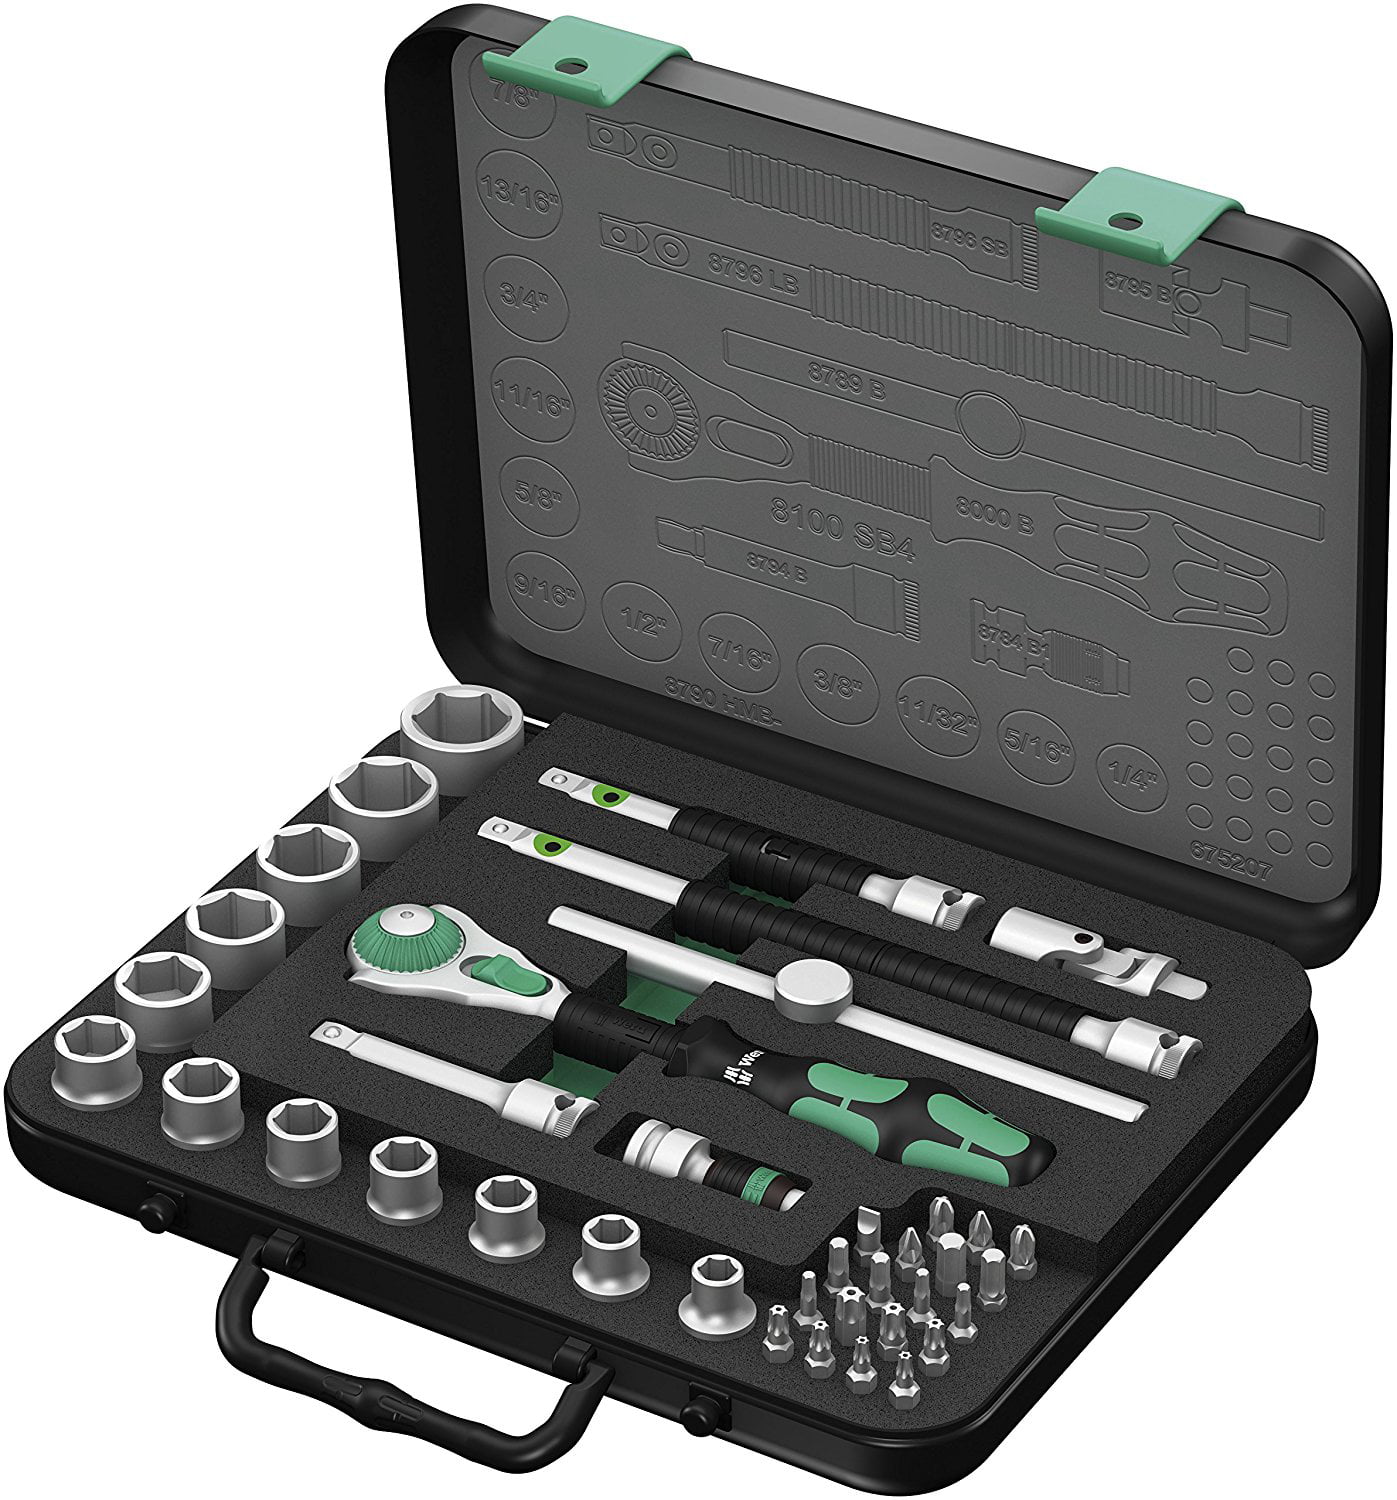 Wera 8100 SA 9 Zyklop Speed Ratchet Set 1/4" Drive Imperial 05004019001 for sale online